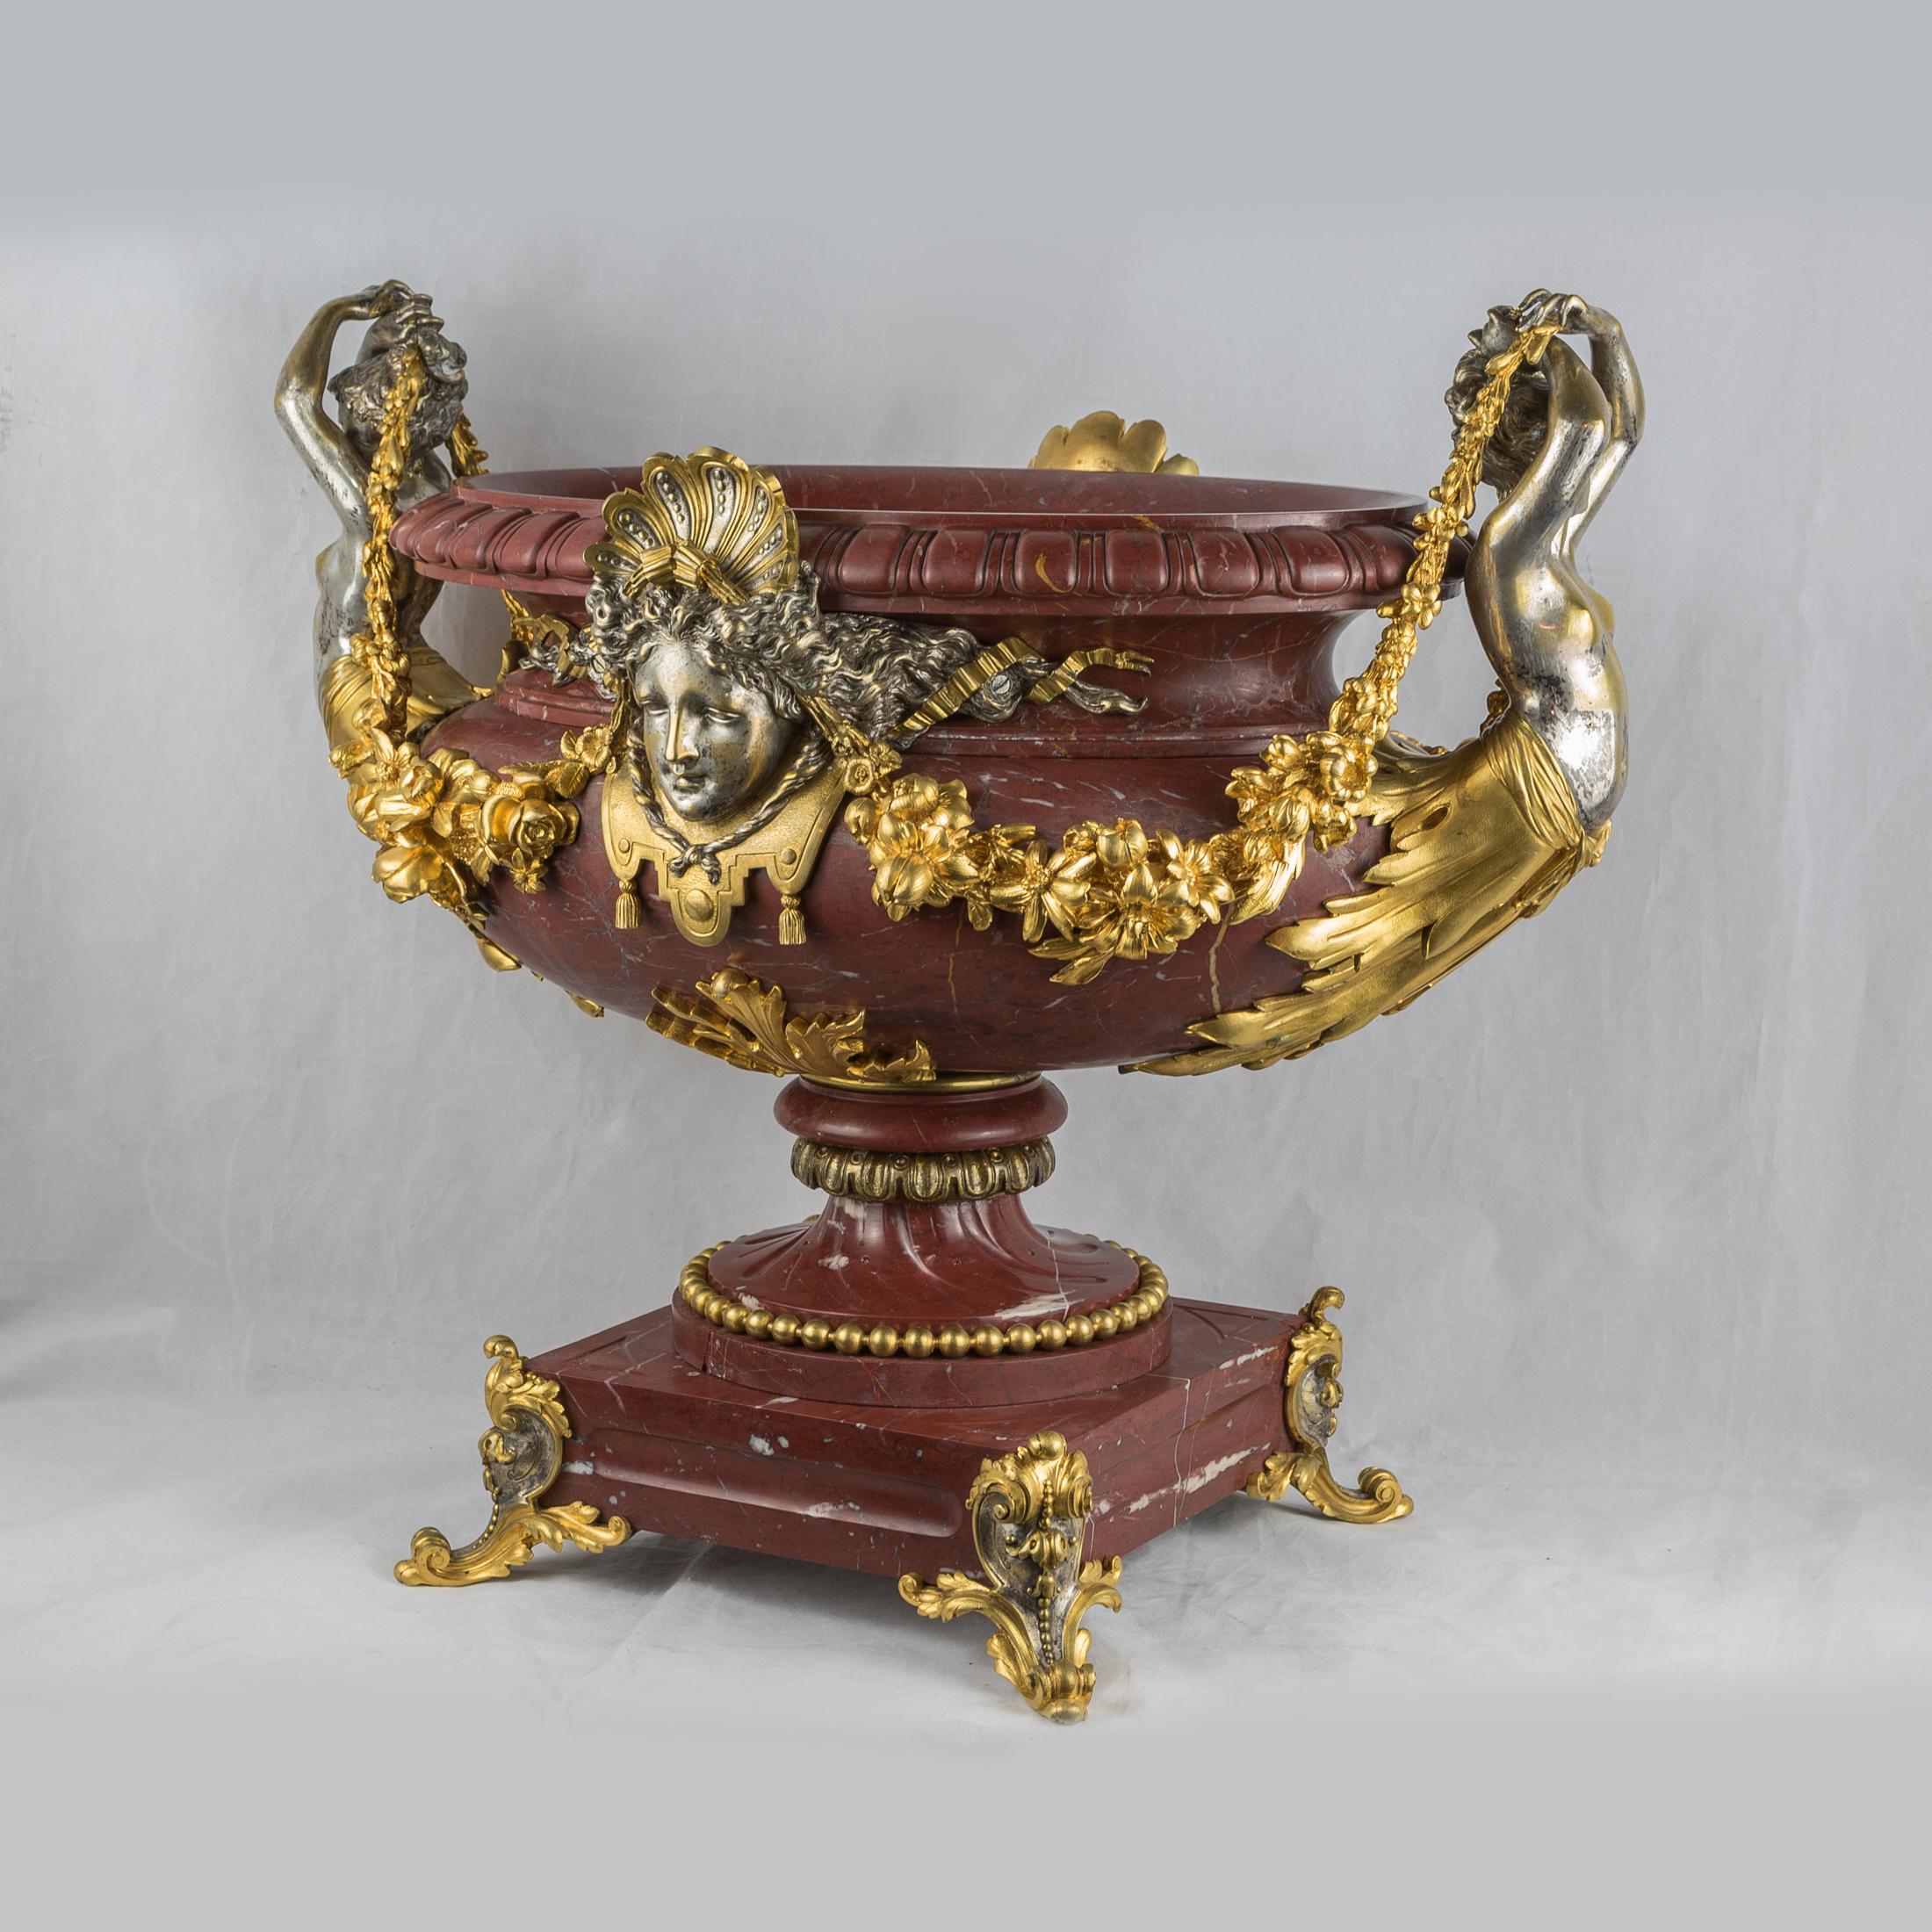 An Exquisite Ormolu-Mounted and Silvered-Bronze and Rouge Griotte Marble Centerpiece.
A mask in the front and reverse, flanked by female terms suspending fruiting swags. 

Origin: French
Date: 19th century
Dimension: 17 5/8 in. x 20 ½ in. x 12